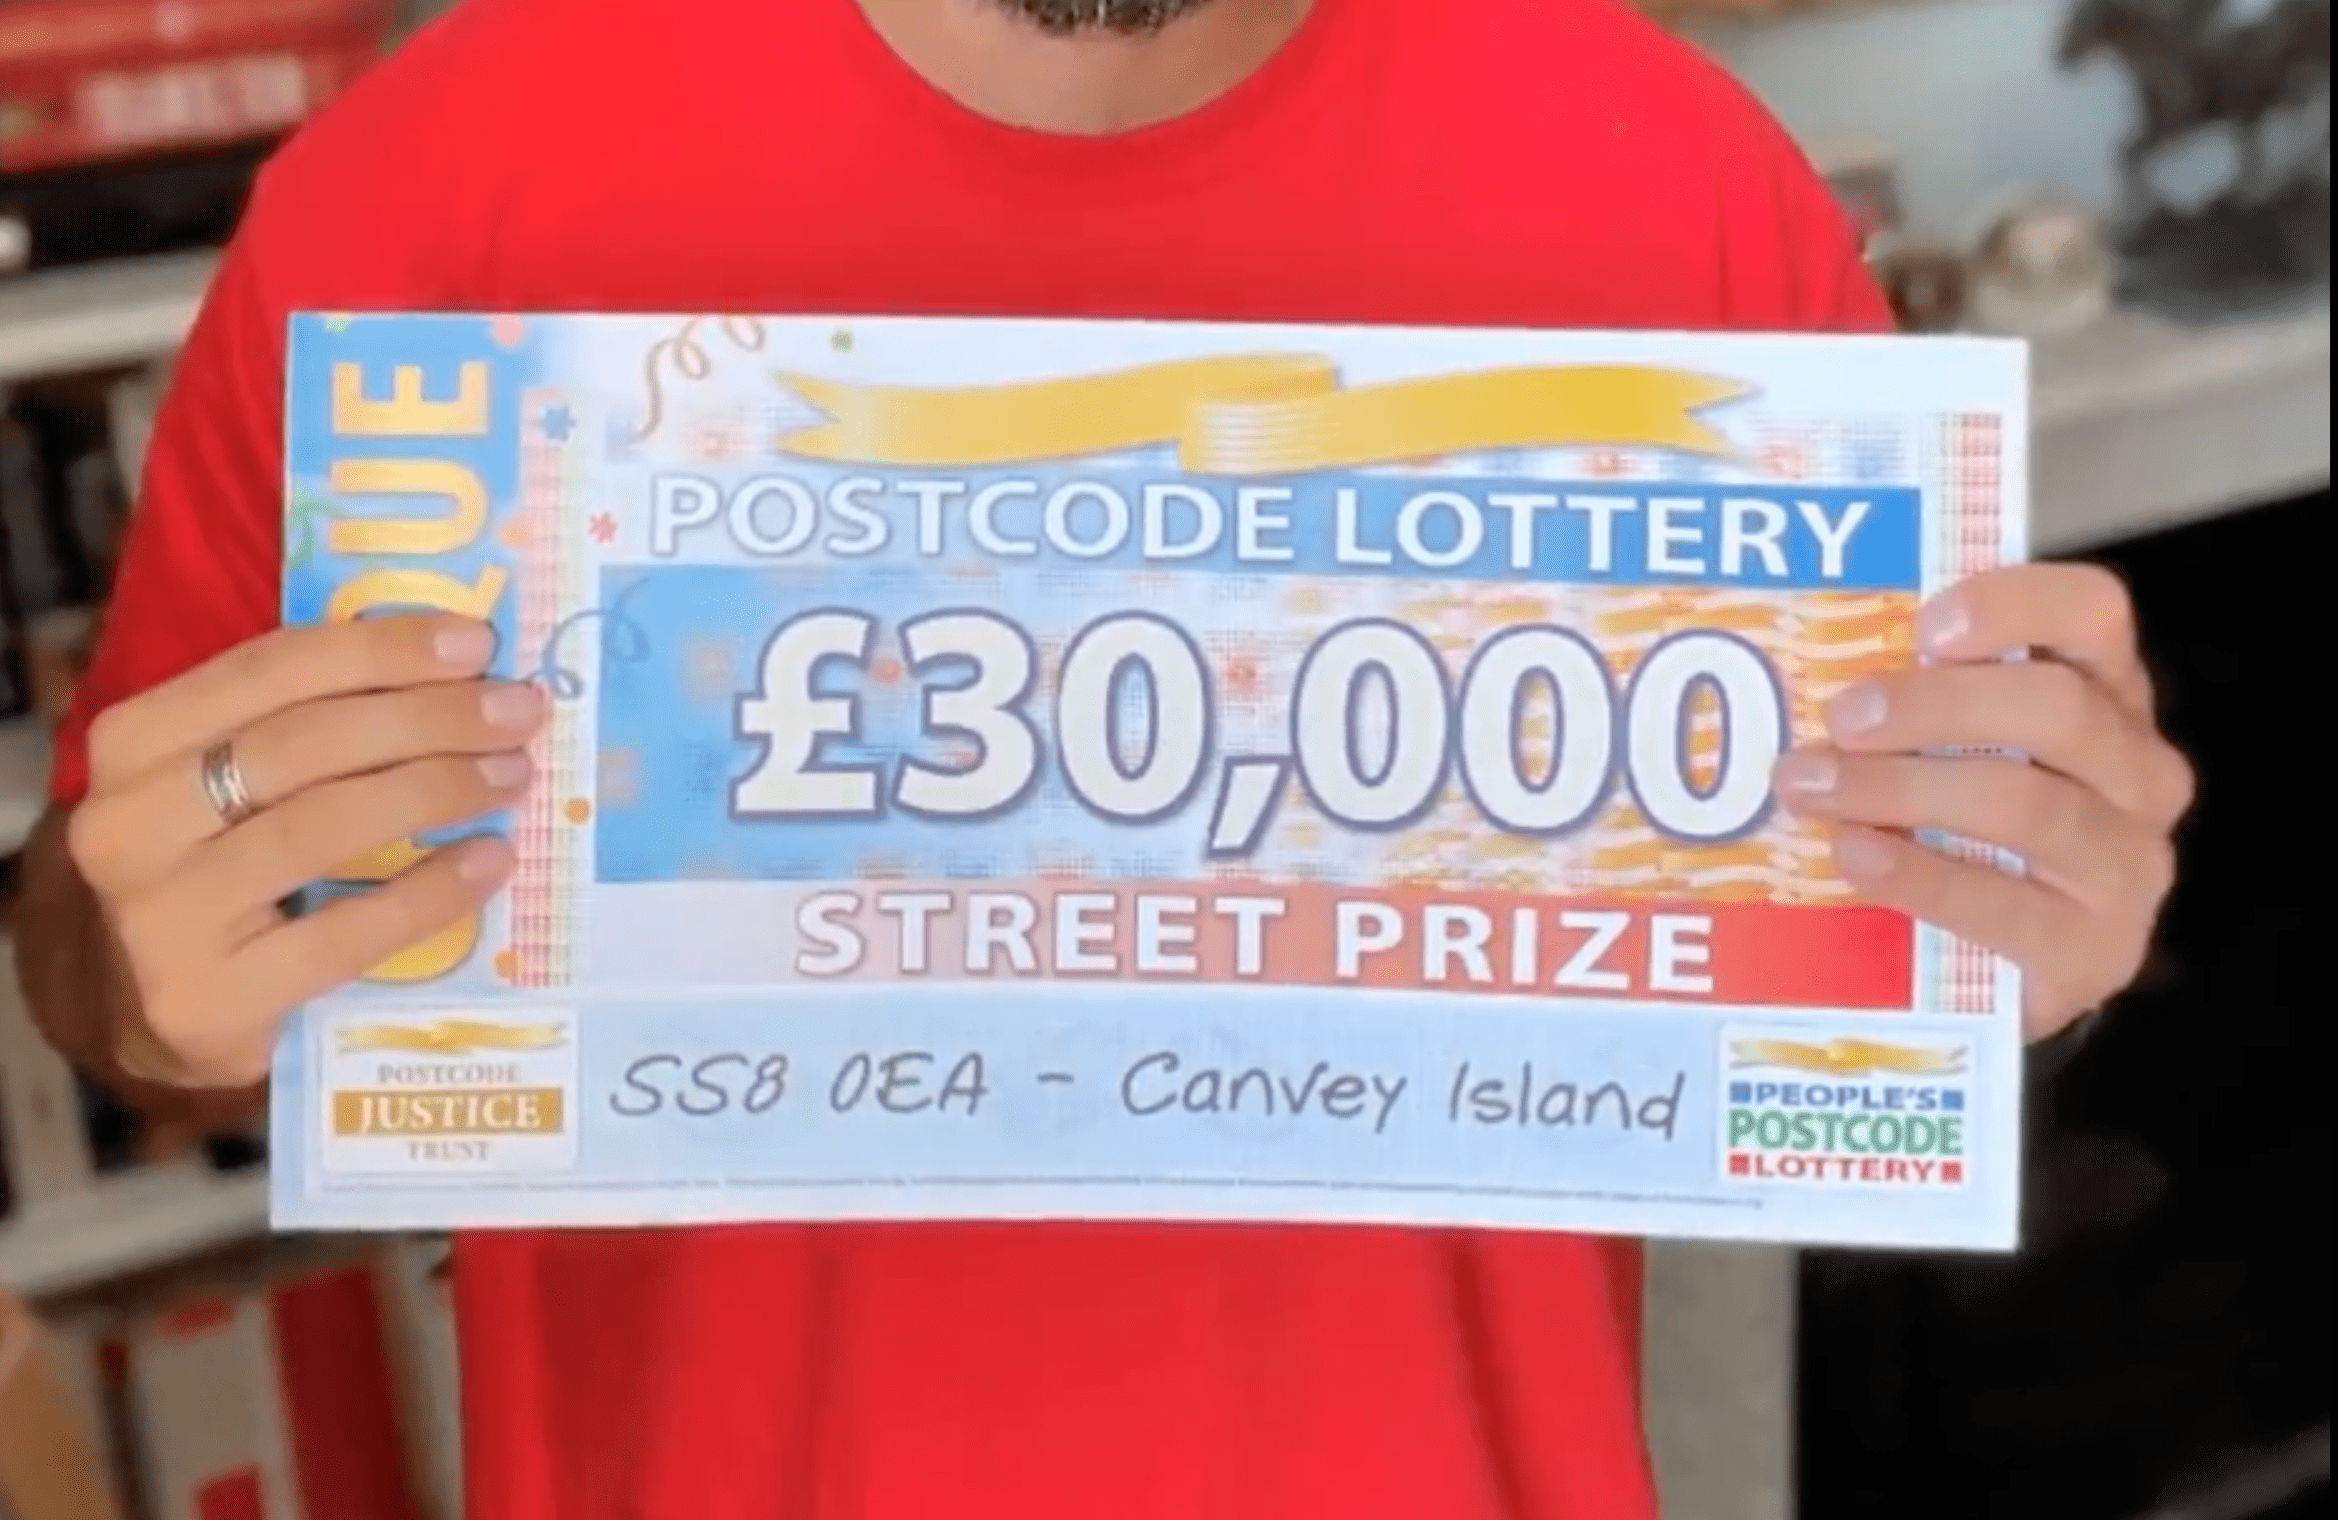 People’s Postcode Lottery ambassador holds up a cheque to show a woman that she has won £30,000 (about $41,300) in the lottery | Photo: Twitter/BBCEssex